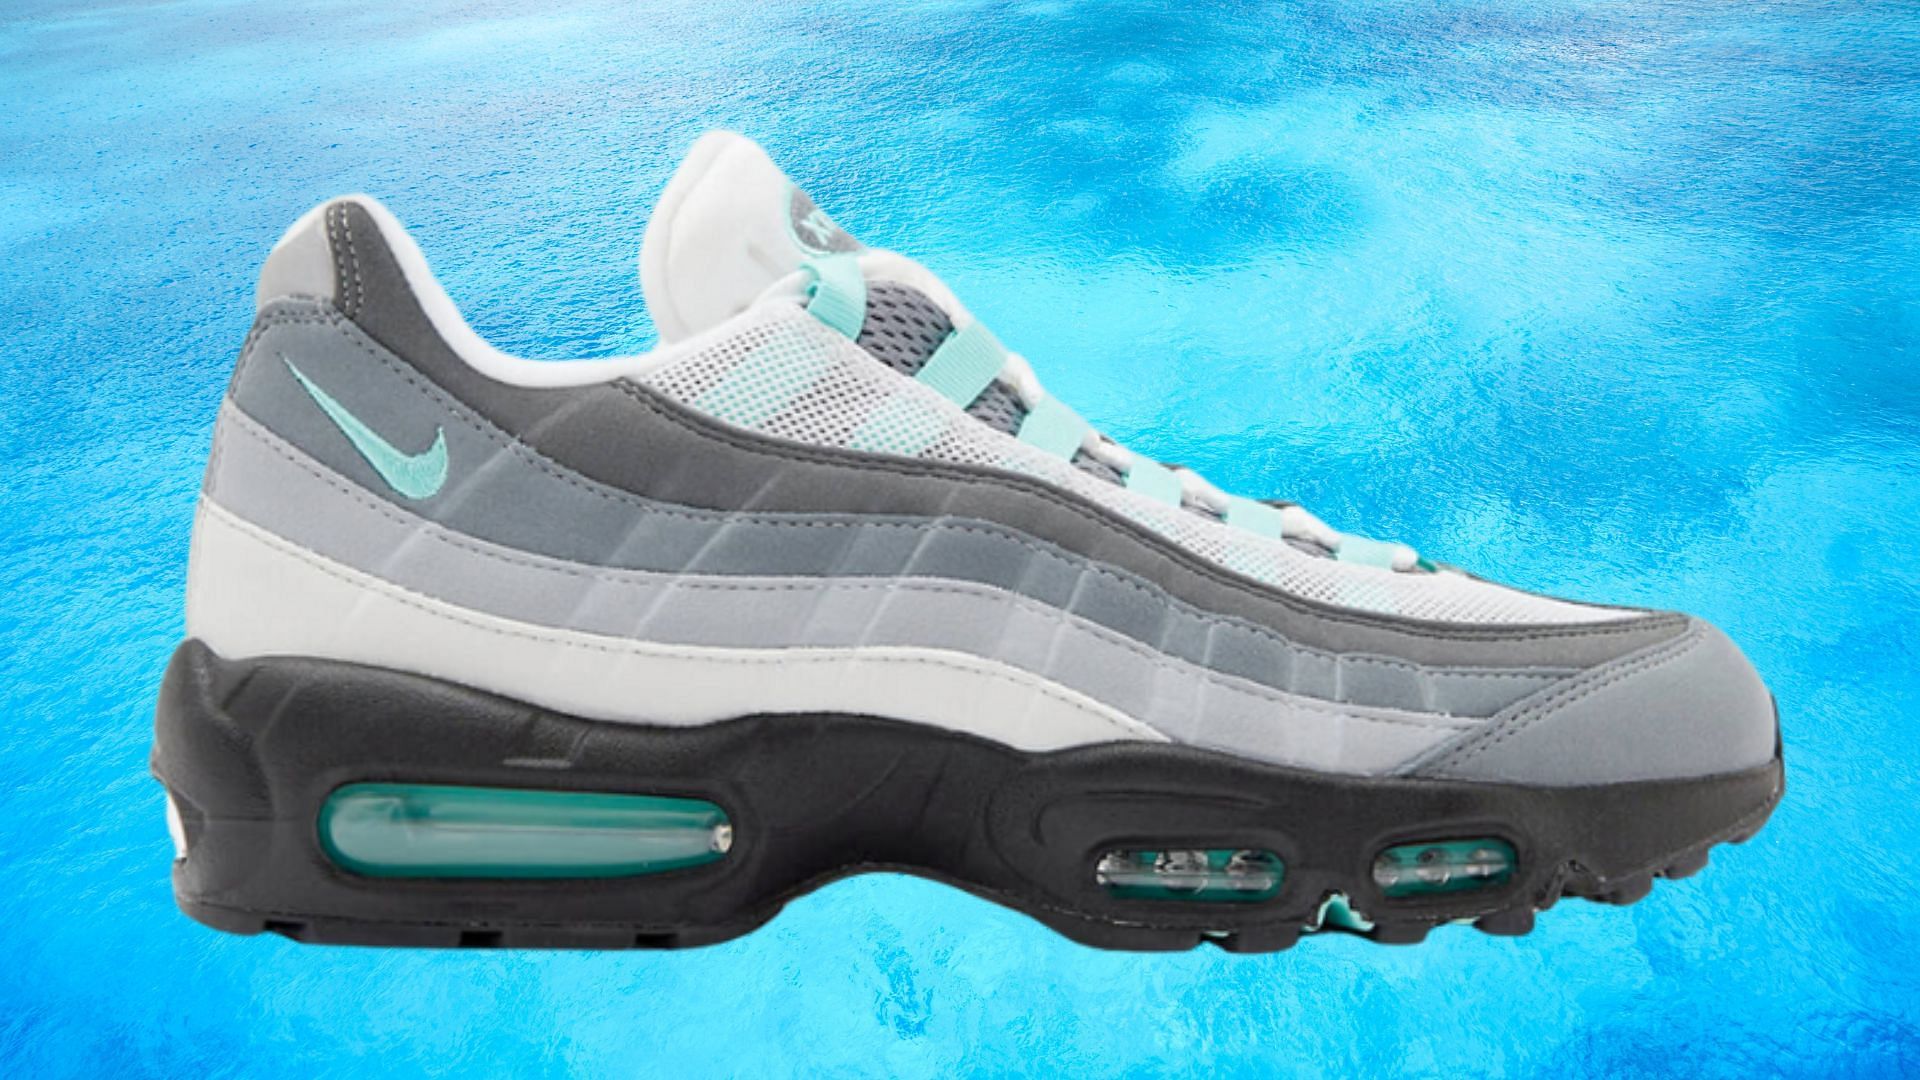 Folkeskole Delvis licens Nike: Nike Air Max 95 "Grey Hyper Turquoise" shoes: Where to get, price,  and more details explored